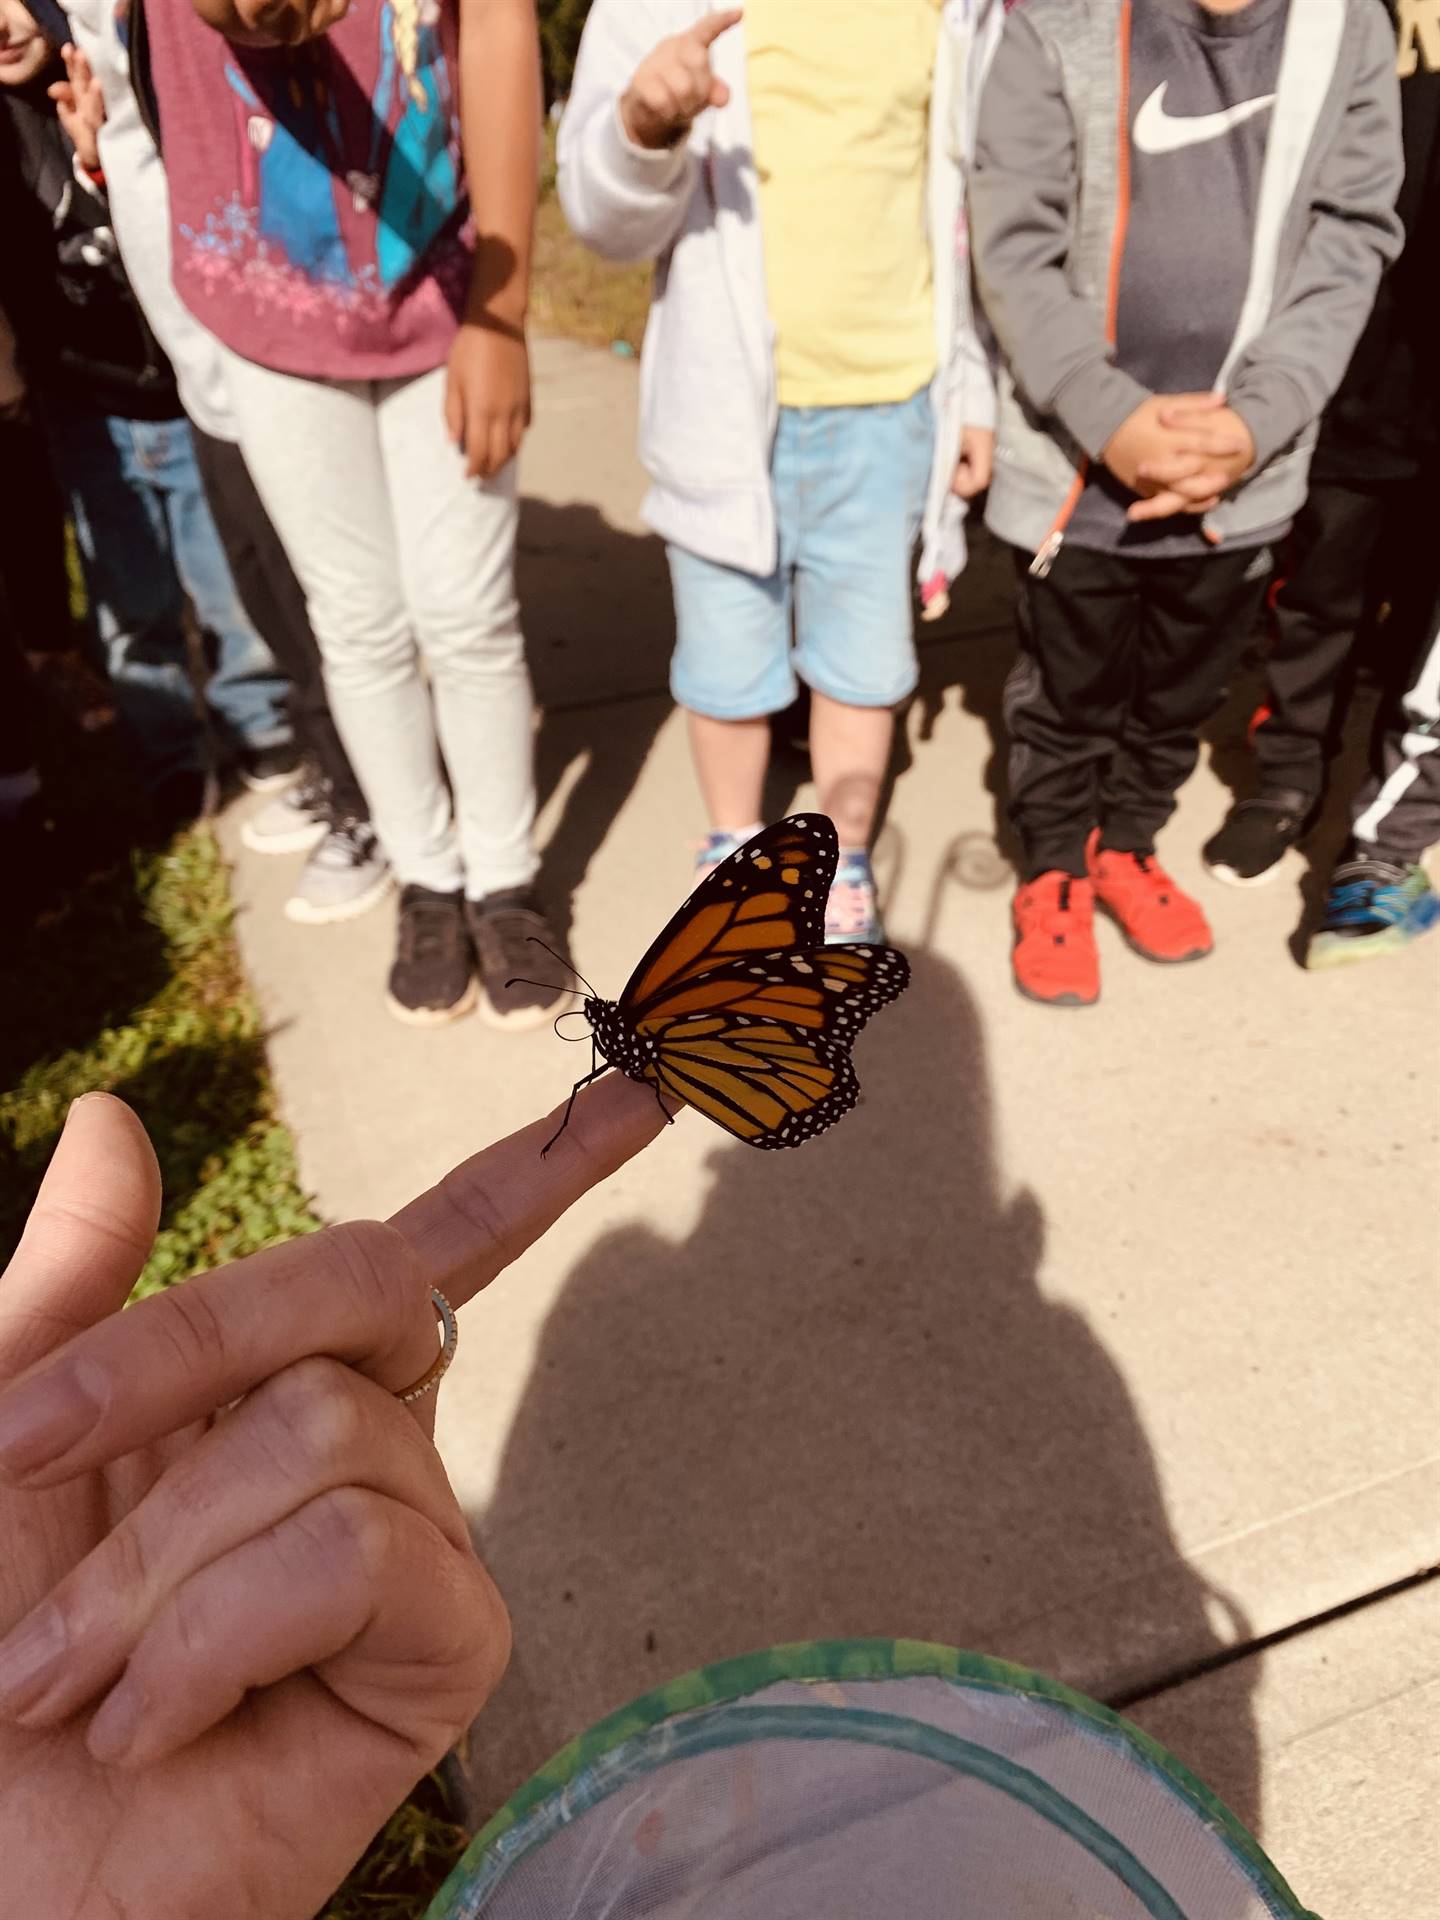 A monarch butterfly perched on a finger